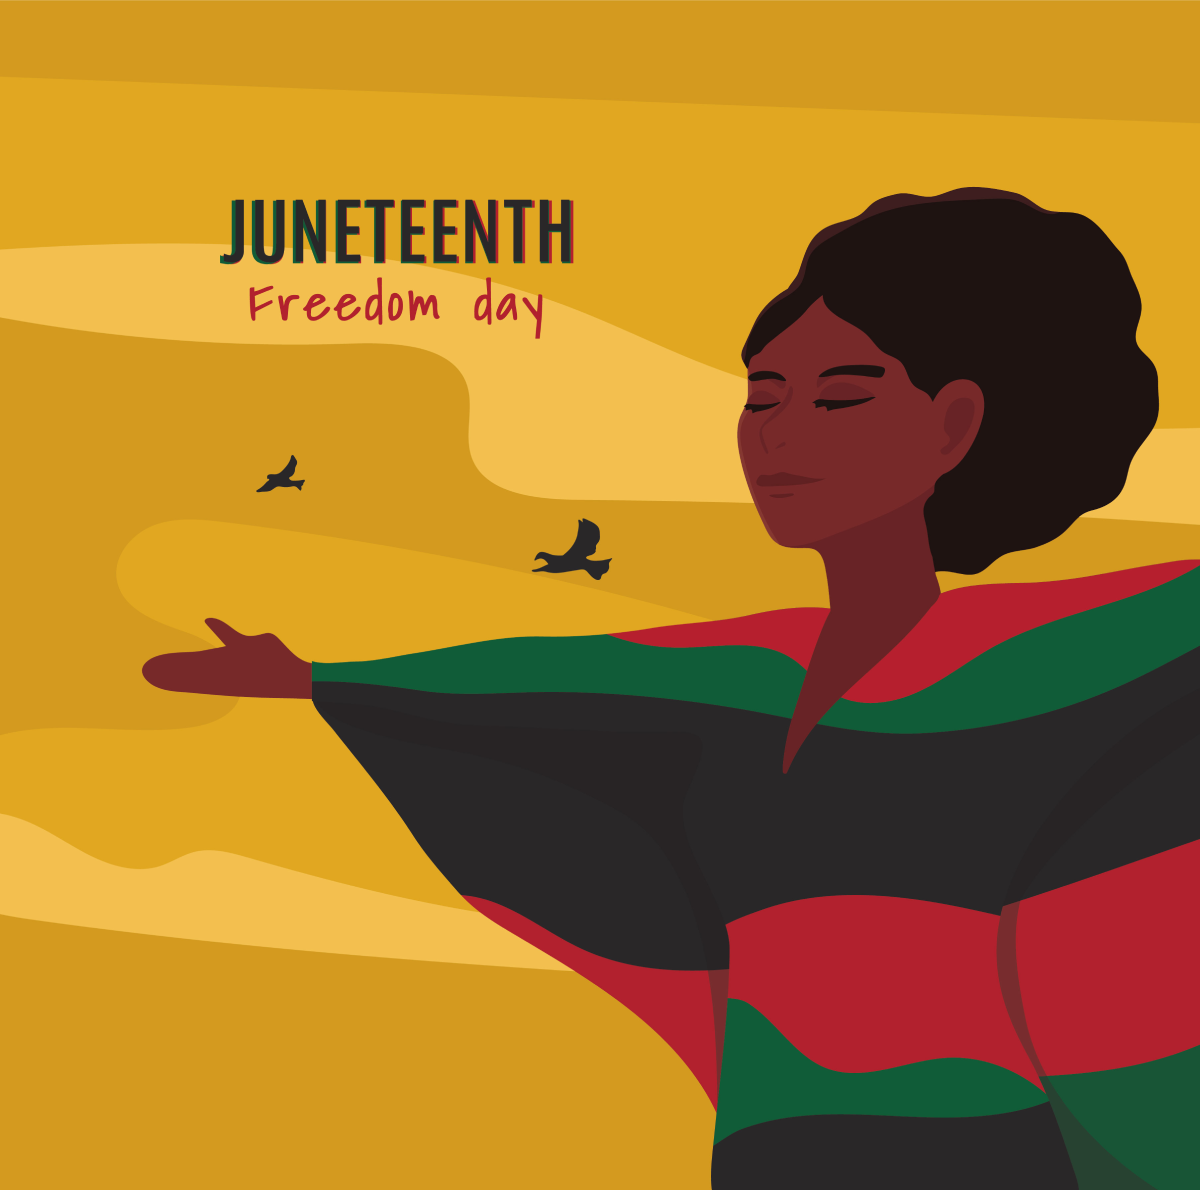 Juneteenth Freedom Day: woman in brightly colored dress holding her hands straight out as 2 birds fly by